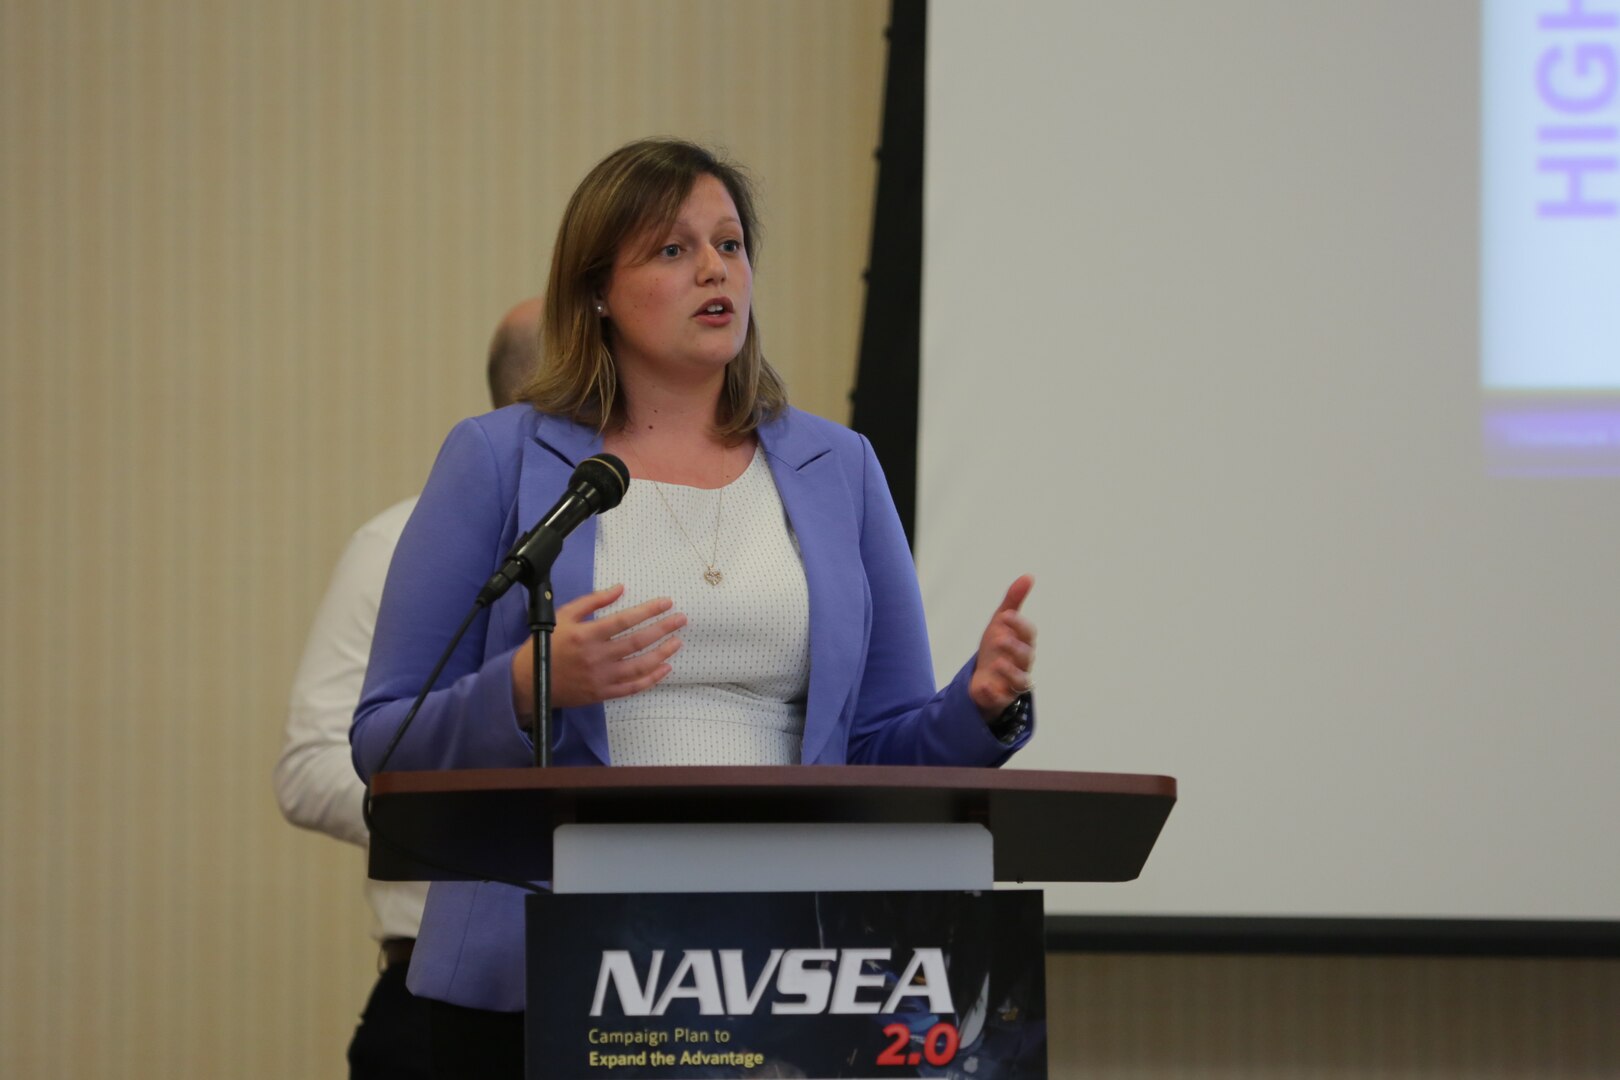 Naval Surface Warfare Center Panama City Division (NSWC PCD) Engineer, Allison Price, recently spoke at the Naval Sea Systems Command (NAVSEA) High Velocity Learning Summit about her experiences in the Next Generation (NextGen) Leadership Development Program to encourage employees to consider applying for this year’s program.